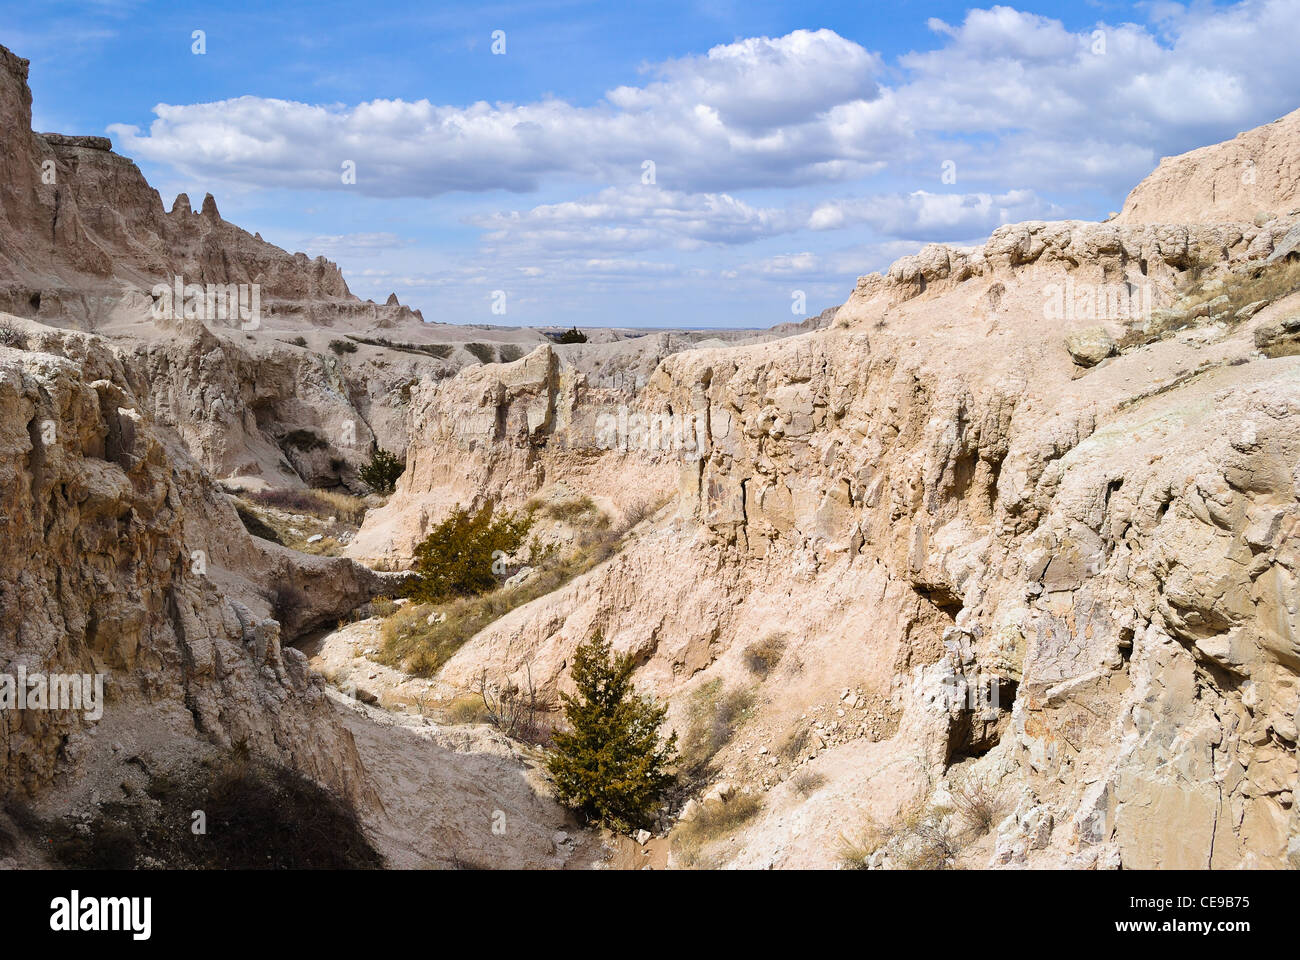 View of a Canyon at Badlands National Park in South Dakota, USA Stock Photo